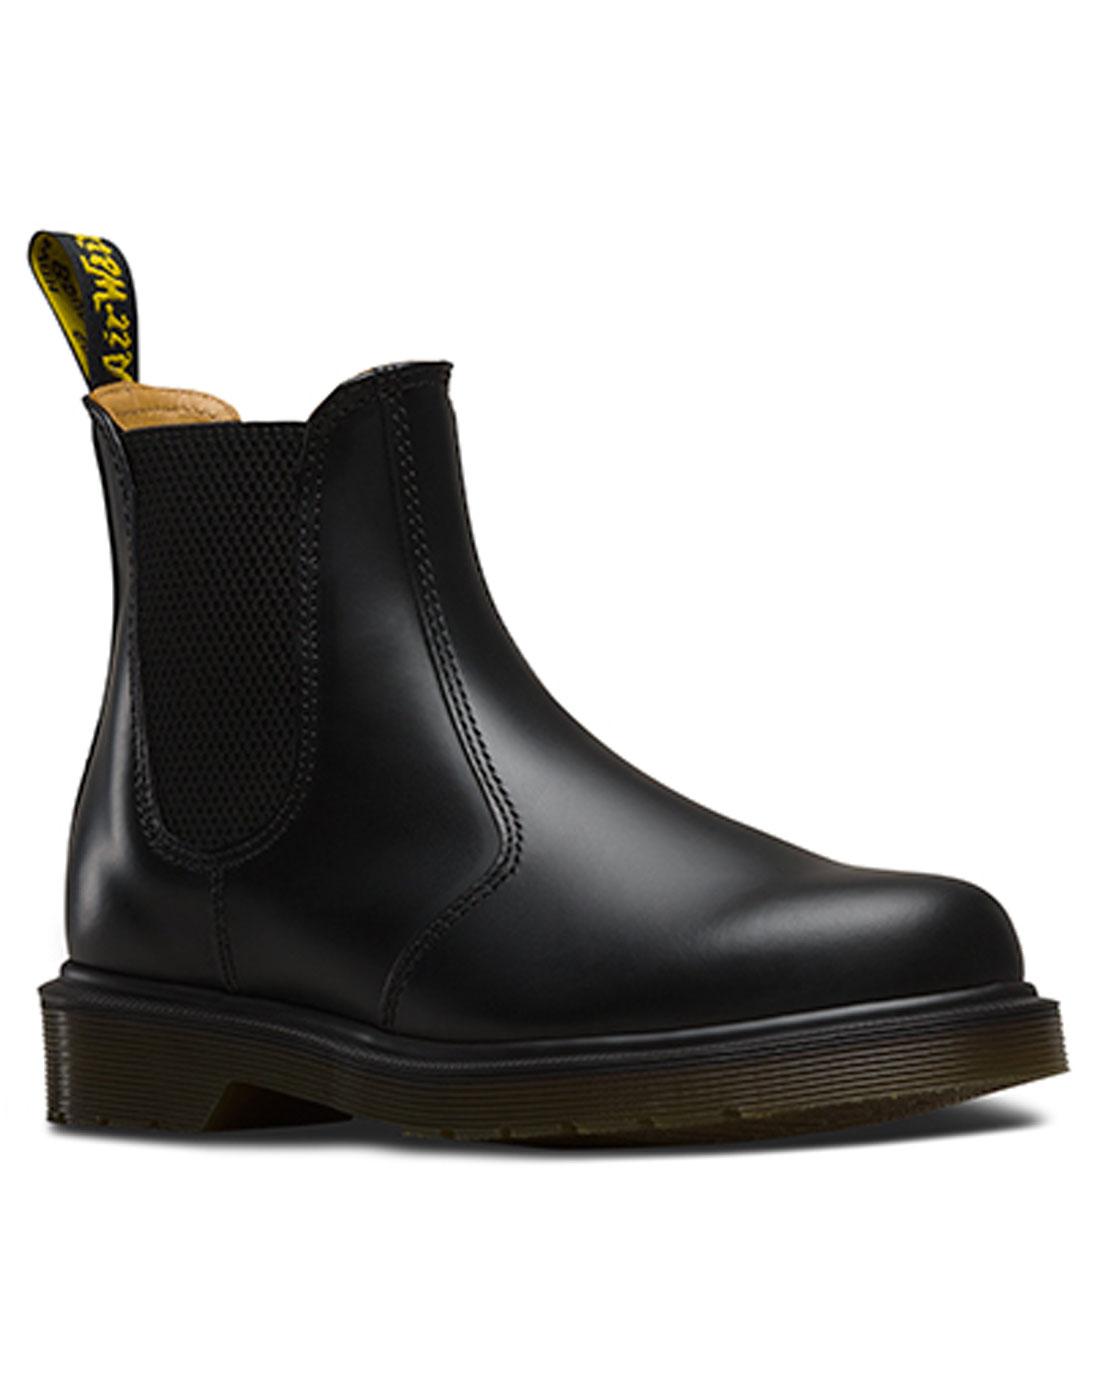 2976 Smooth DR MARTENS 60s Mod Chelsea Boots BLACK